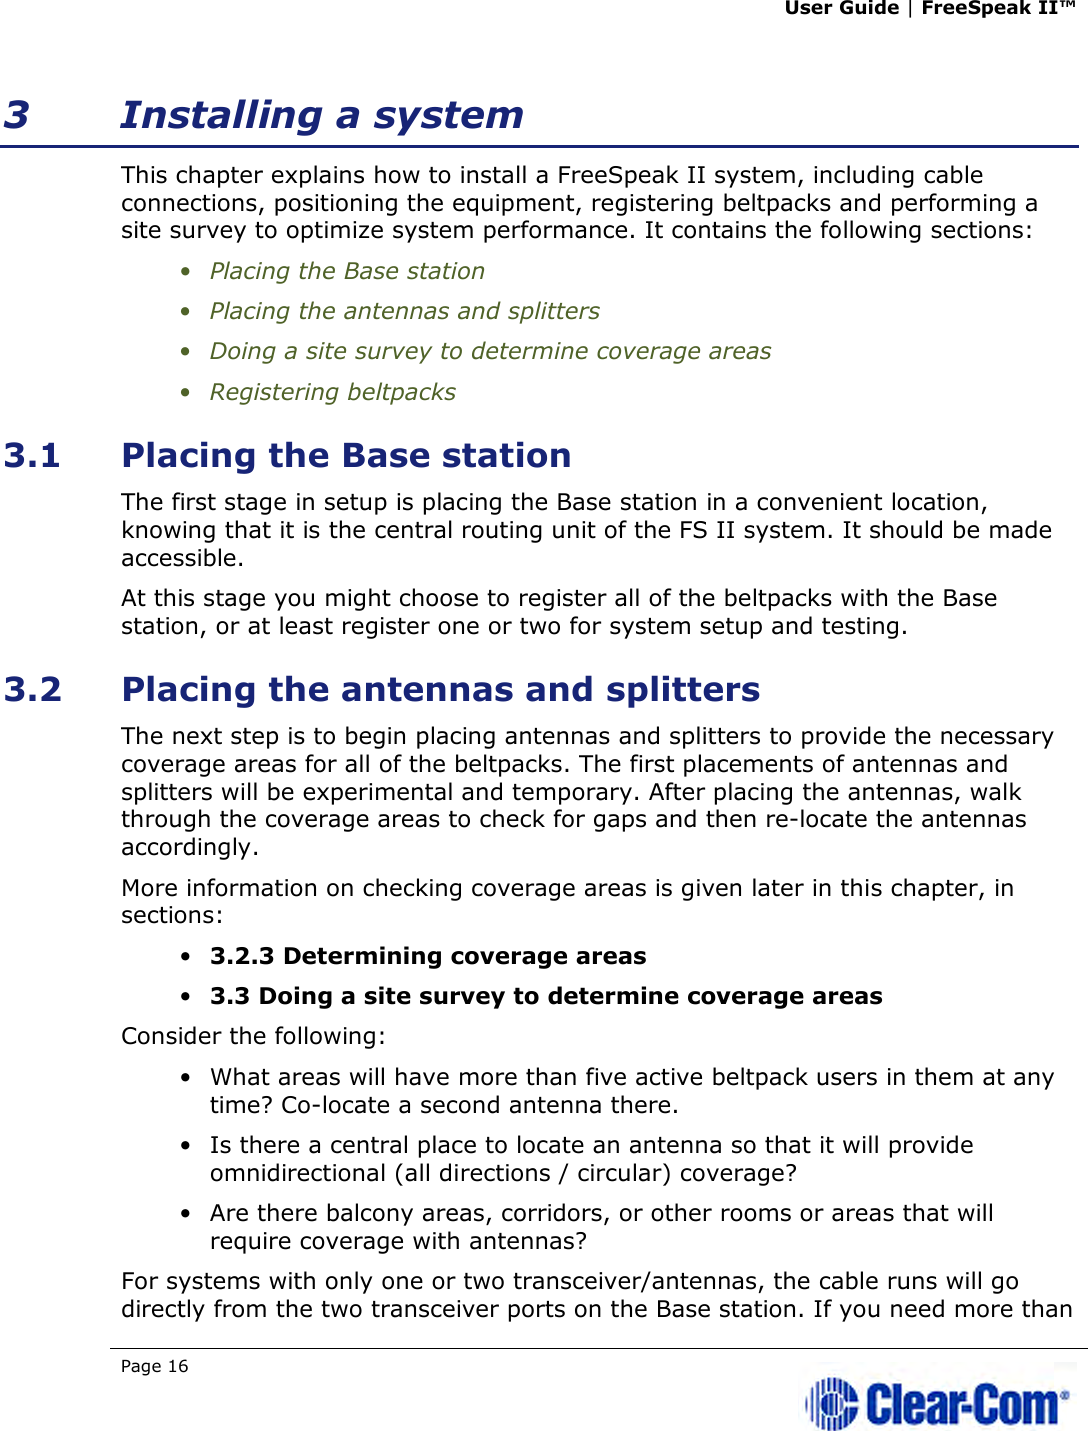 User Guide | FreeSpeak II™  Page 16   3 Installing a system This chapter explains how to install a FreeSpeak II system, including cable connections, positioning the equipment, registering beltpacks and performing a site survey to optimize system performance. It contains the following sections: • Placing the Base station • Placing the antennas and splitters • Doing a site survey to determine coverage areas • Registering beltpacks 3.1 Placing the Base station The first stage in setup is placing the Base station in a convenient location, knowing that it is the central routing unit of the FS II system. It should be made accessible. At this stage you might choose to register all of the beltpacks with the Base station, or at least register one or two for system setup and testing. 3.2 Placing the antennas and splitters  The next step is to begin placing antennas and splitters to provide the necessary coverage areas for all of the beltpacks. The first placements of antennas and splitters will be experimental and temporary. After placing the antennas, walk through the coverage areas to check for gaps and then re-locate the antennas accordingly. More information on checking coverage areas is given later in this chapter, in sections: • 3.2.3 Determining coverage areas • 3.3 Doing a site survey to determine coverage areas Consider the following: • What areas will have more than five active beltpack users in them at any time? Co-locate a second antenna there.  • Is there a central place to locate an antenna so that it will provide omnidirectional (all directions / circular) coverage?  • Are there balcony areas, corridors, or other rooms or areas that will require coverage with antennas?  For systems with only one or two transceiver/antennas, the cable runs will go directly from the two transceiver ports on the Base station. If you need more than 